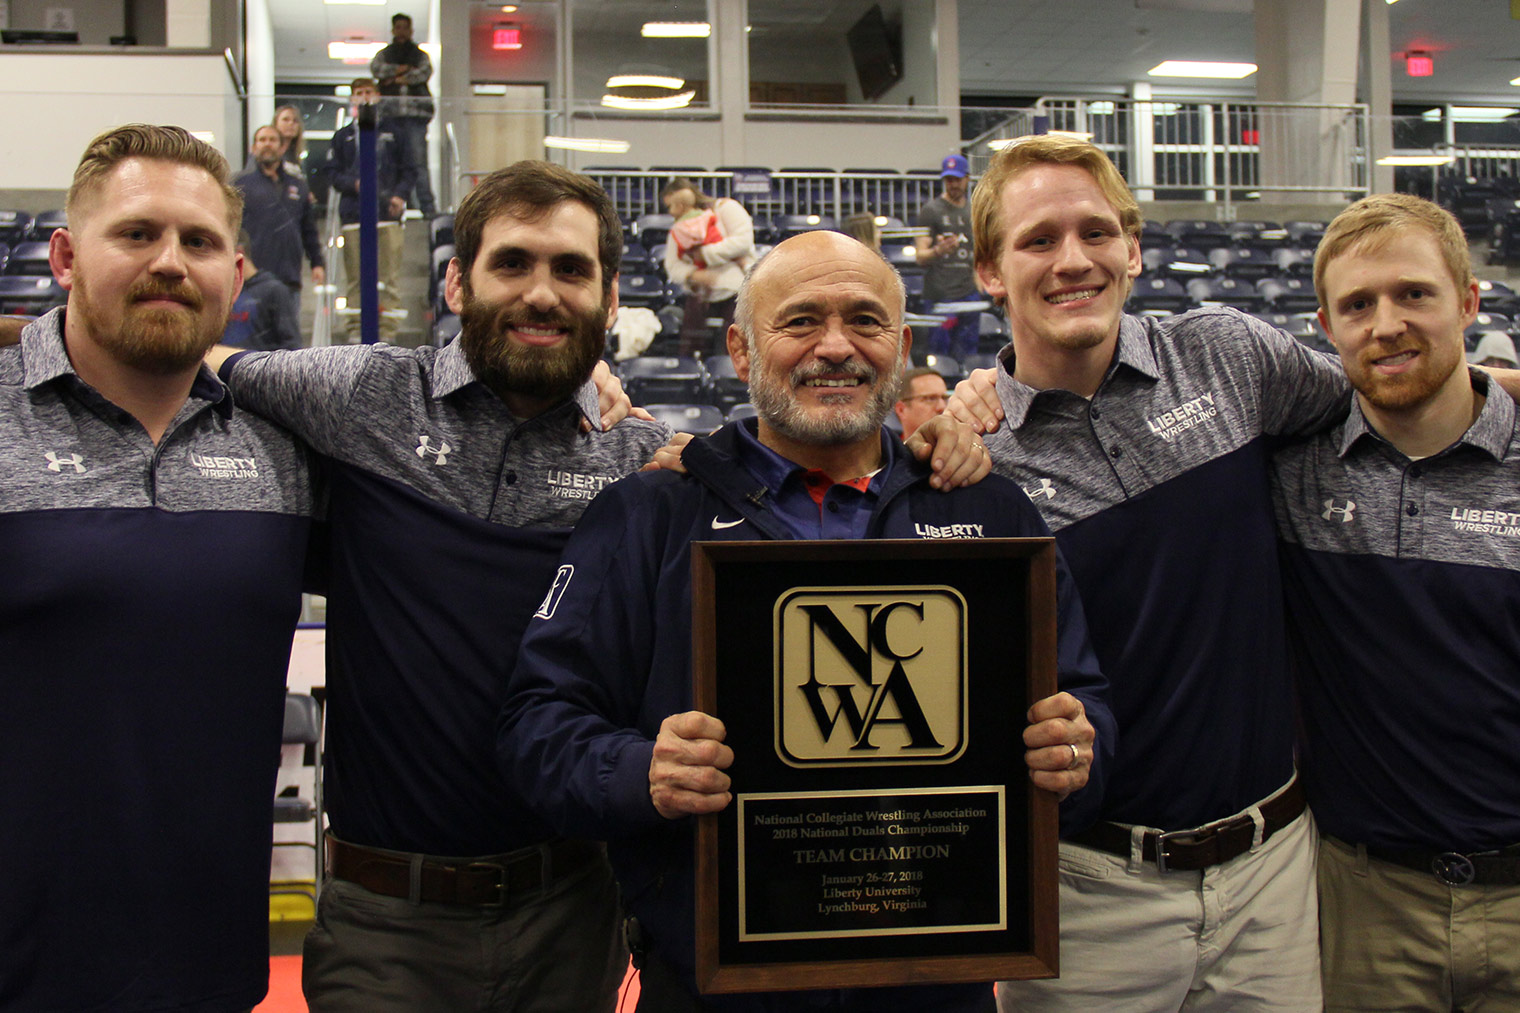 Liberty Head Coach Jesse Castro holds the NCWA National Duals plaque flanked by his assistant coaches. (Photo by Patrick Strawn)